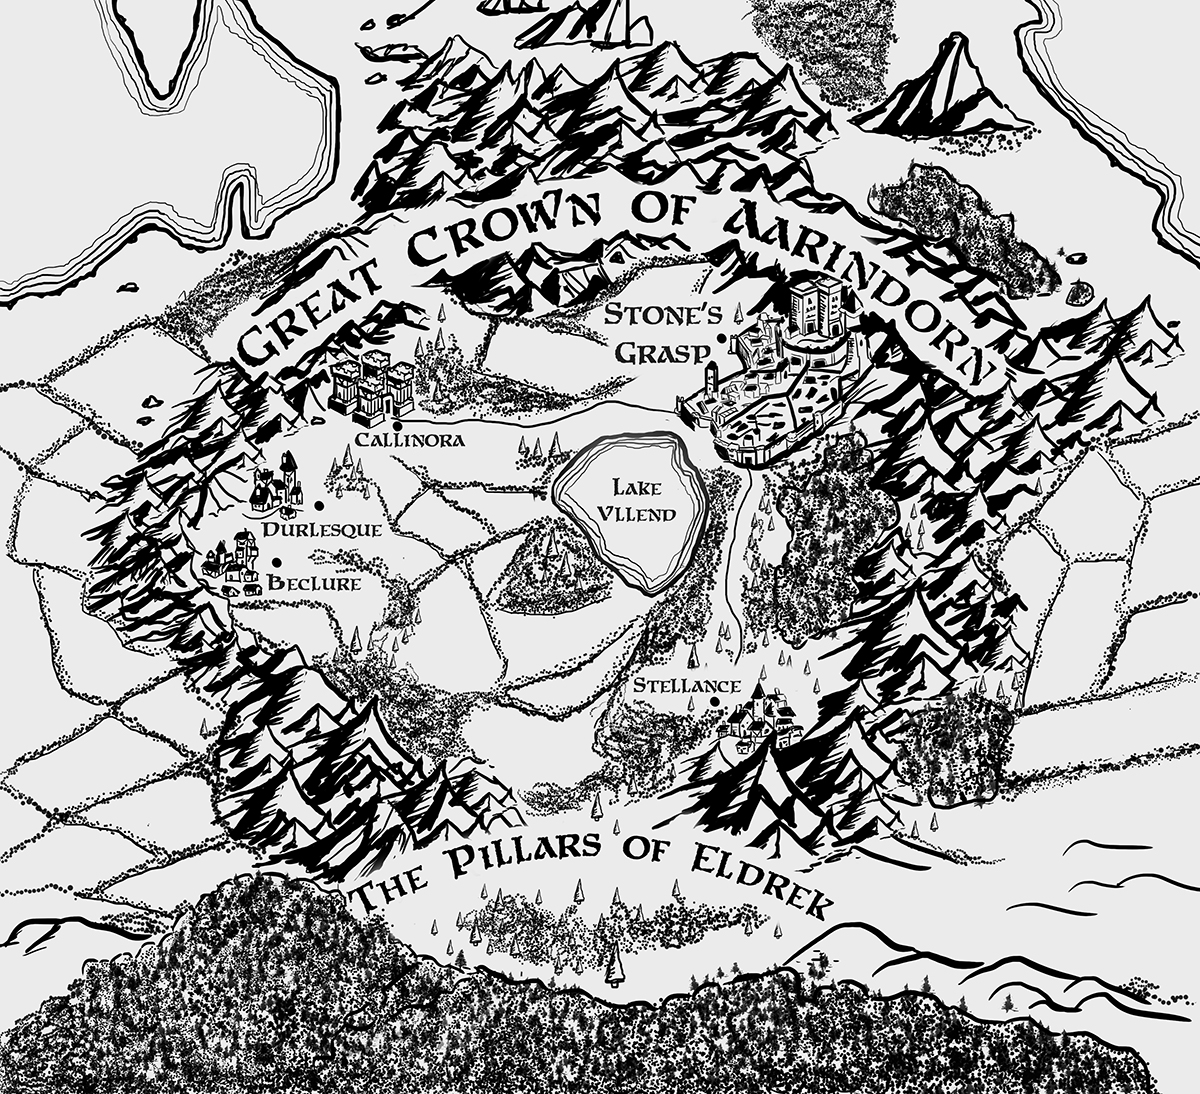 Fantasy map for a book. Commissioned piece by The Noble Artist